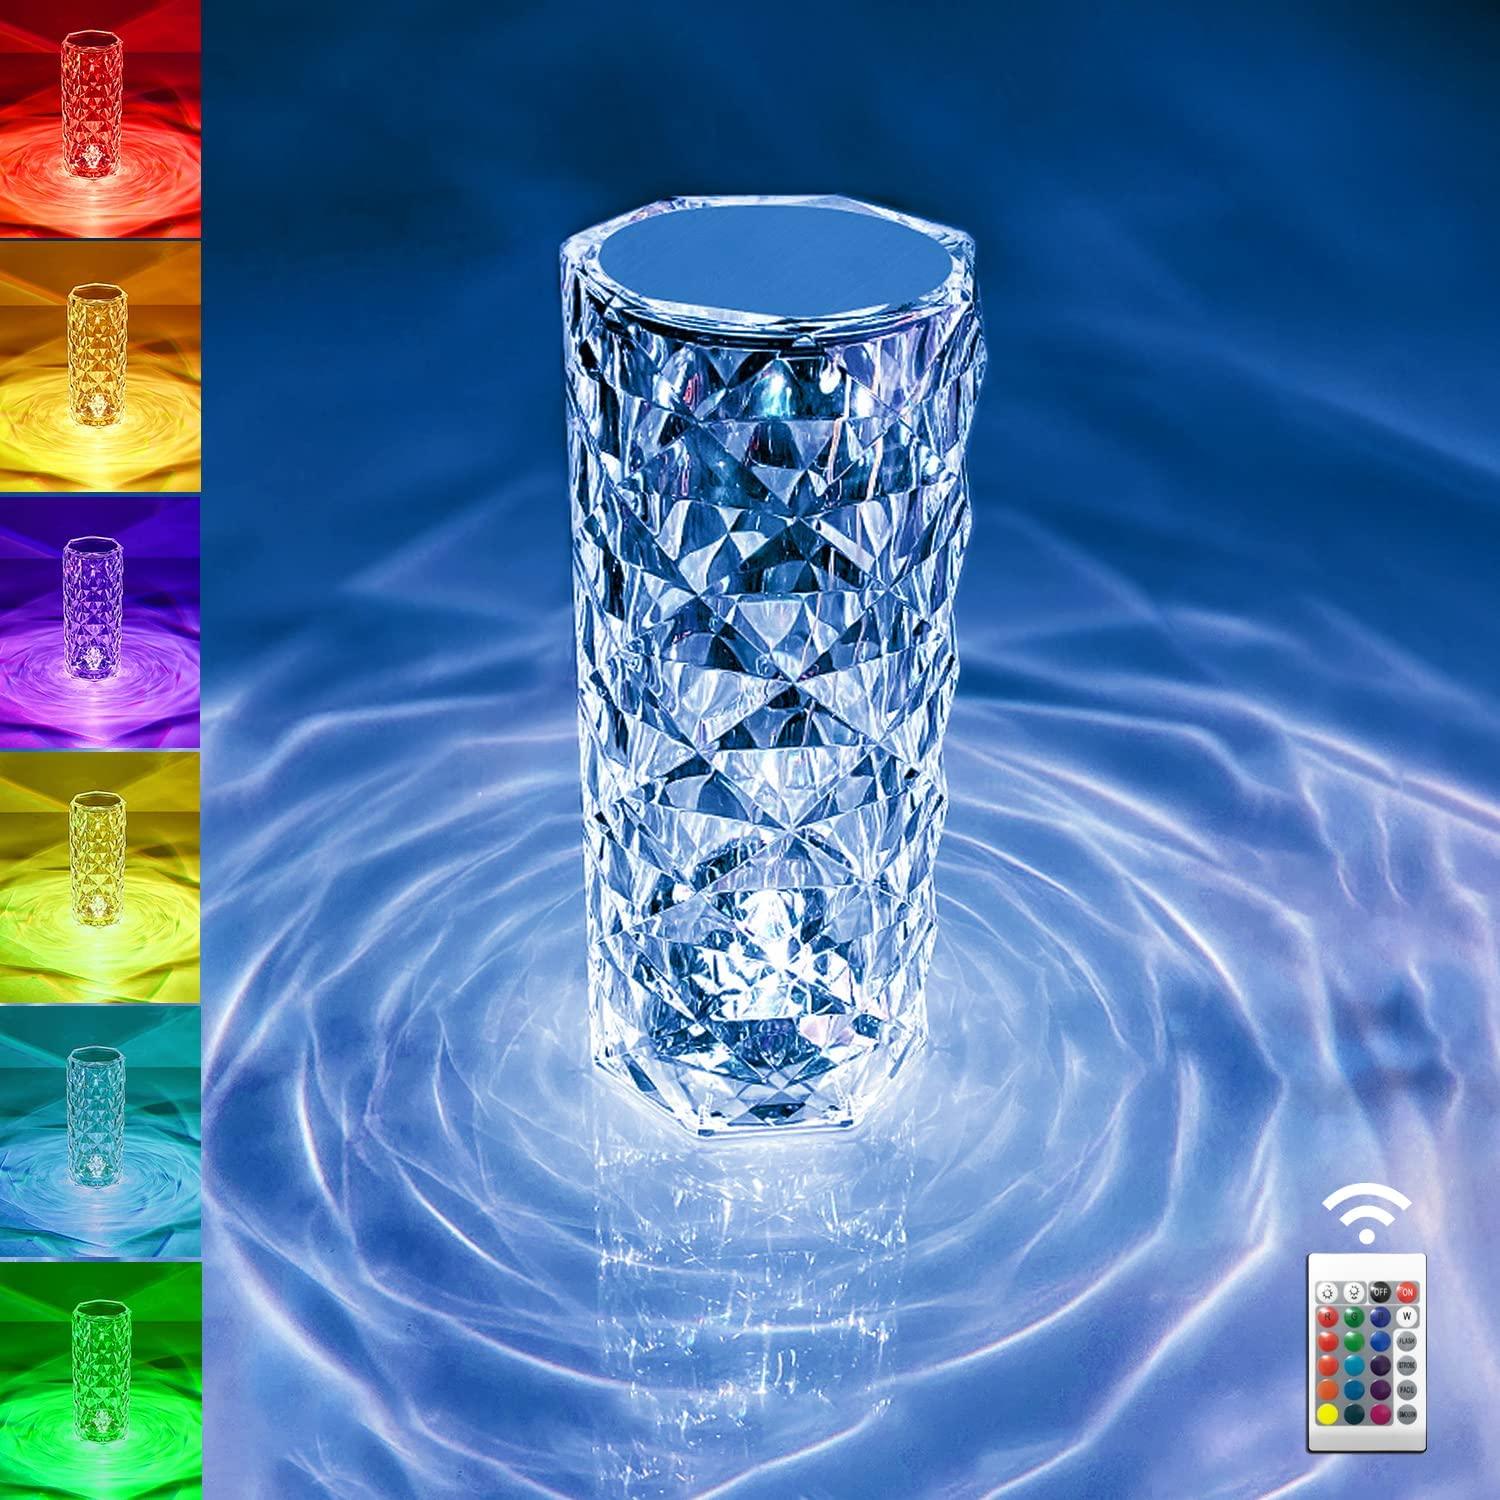 Crystal Table Lamp Rose Lamp, 16 Colors Changing, RGB Touch Lamp with Remote Control - Decotree.co Online Shop